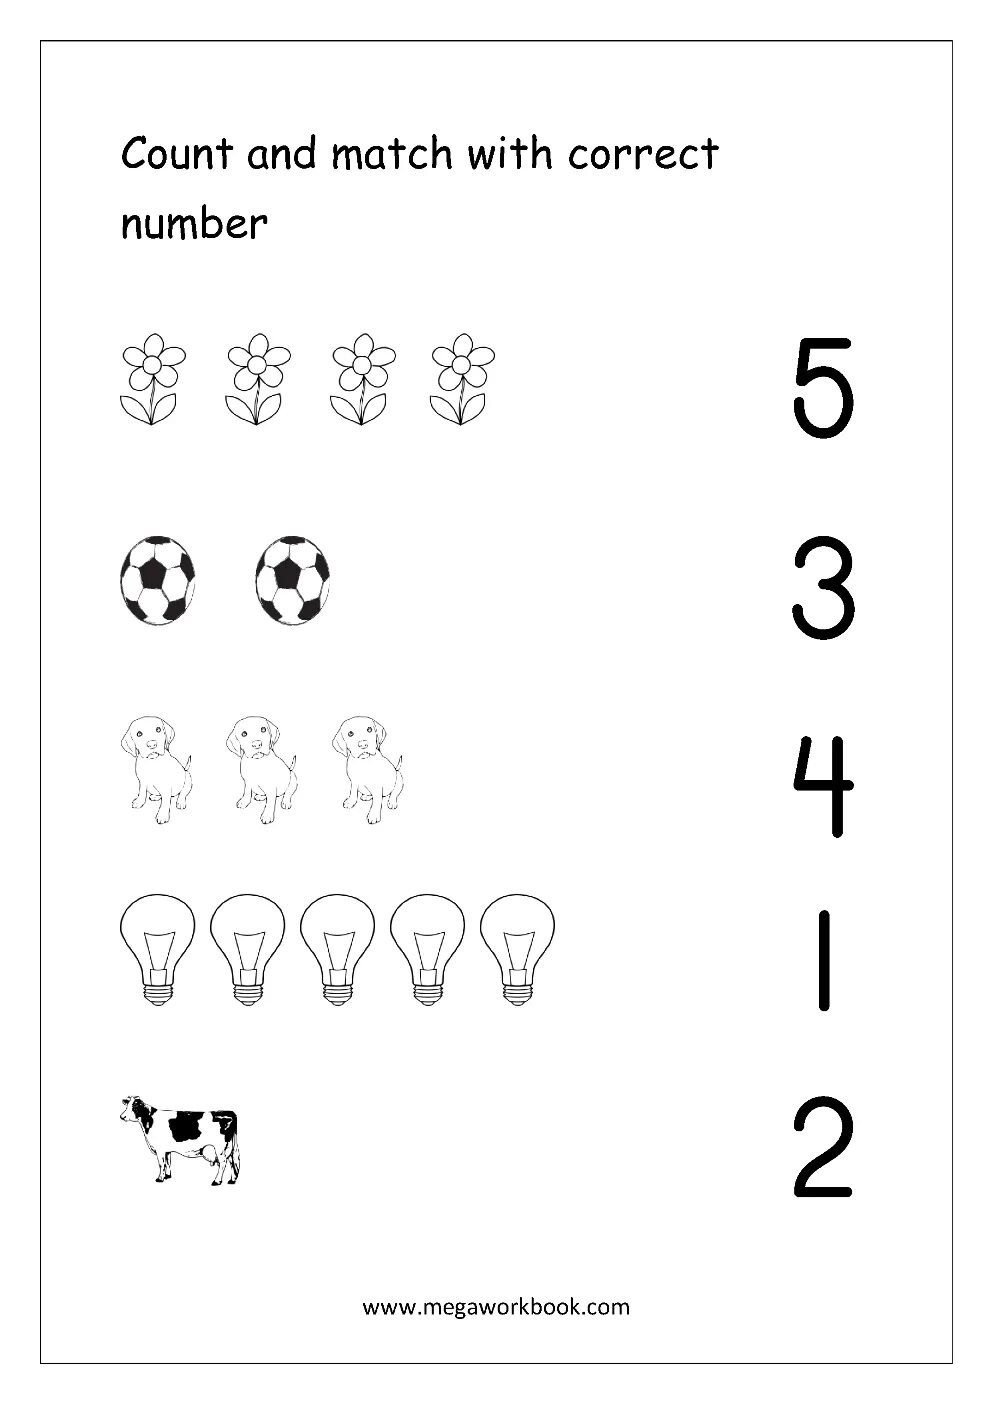 Count and Match. Count and Match Worksheets for Kids. Numbers matching Worksheet for Kids. Count and Match numbers Worksheet for Kindergarten. Each a from 1 to 5